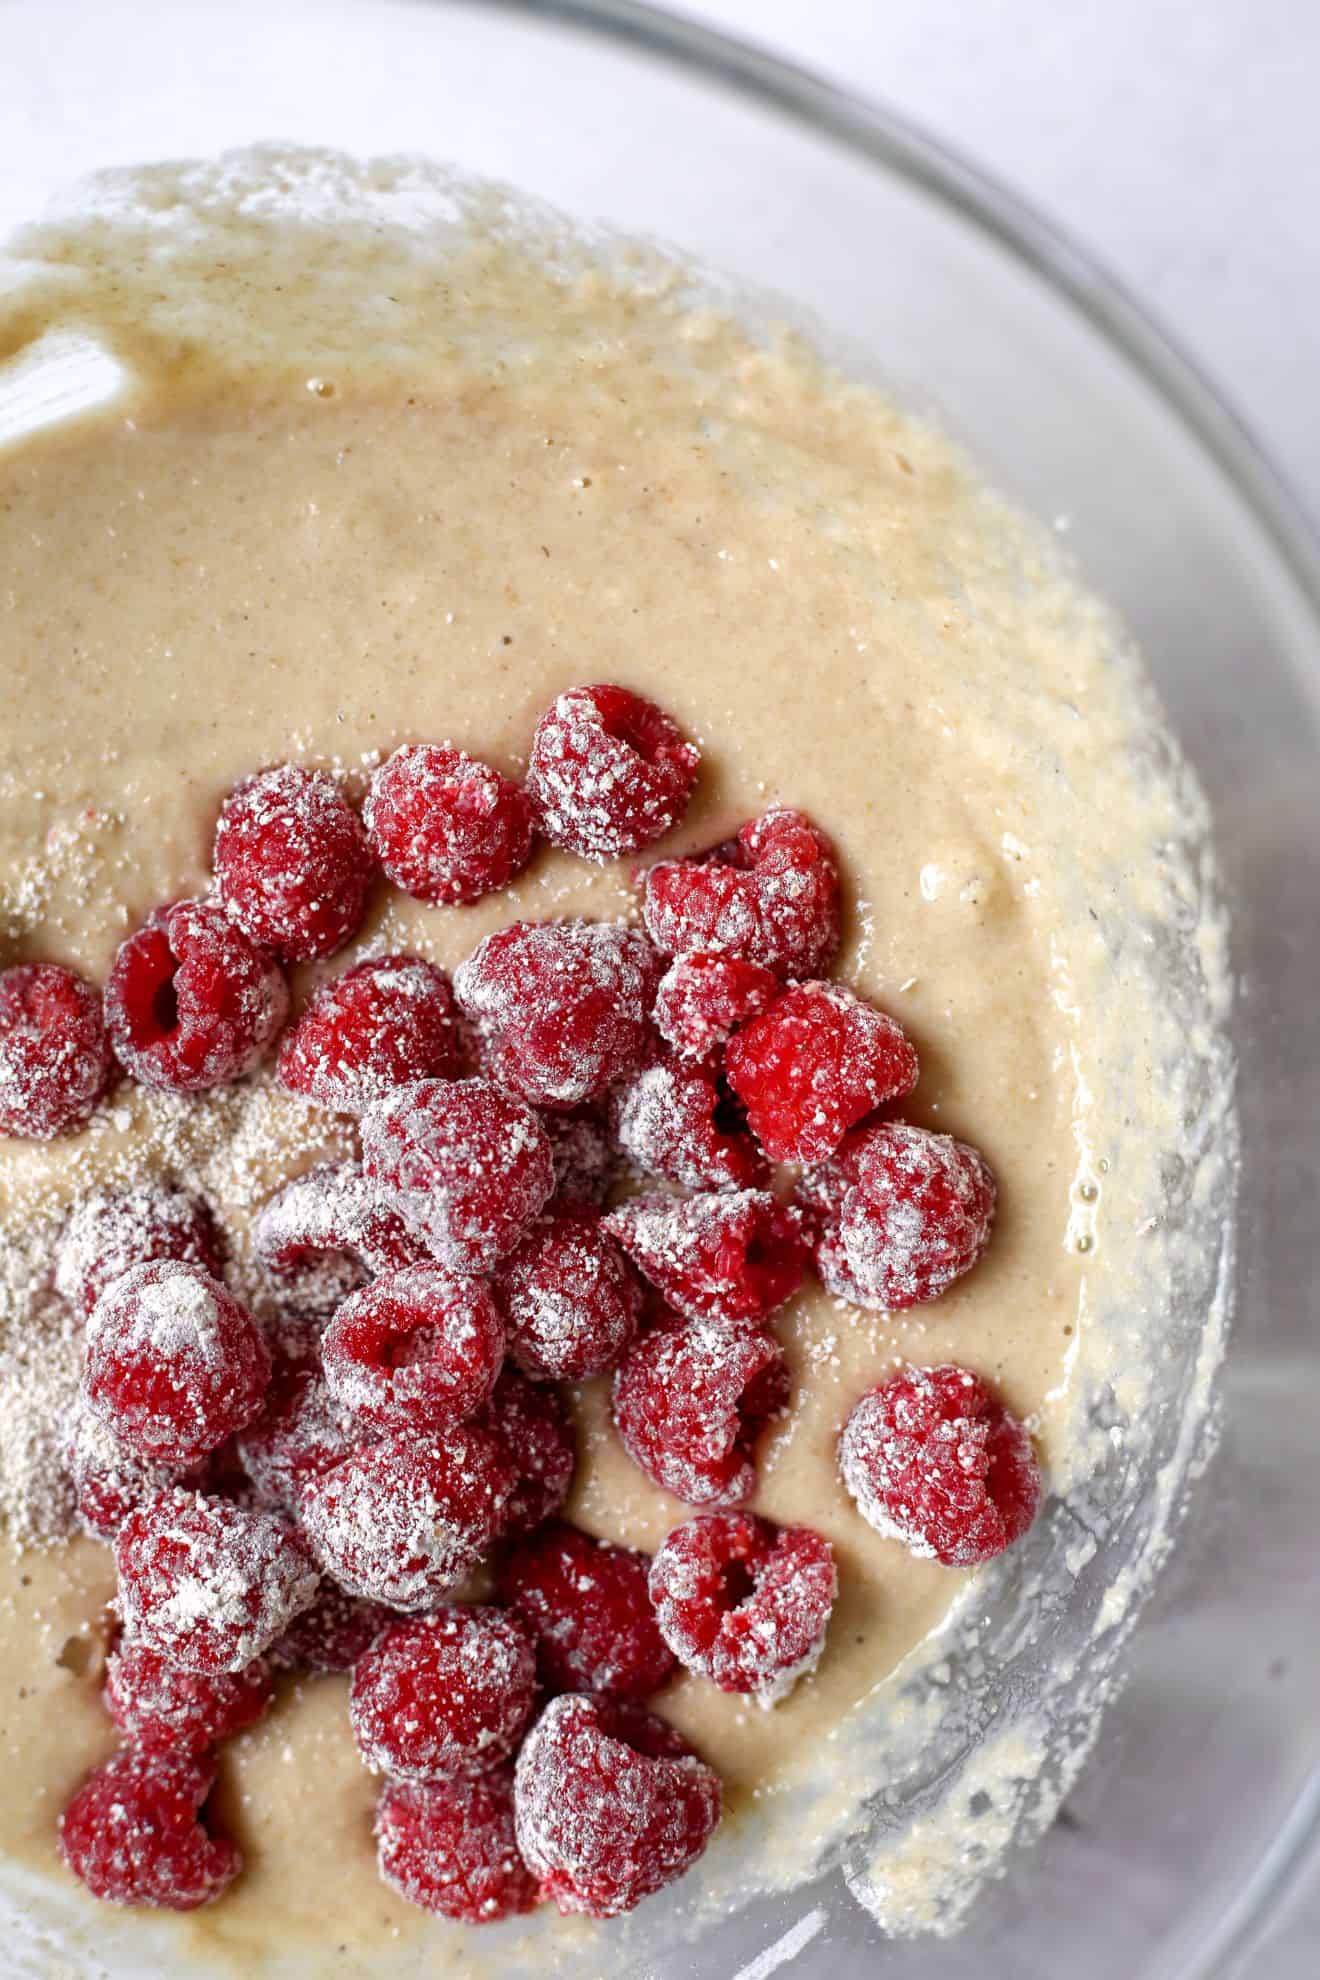 This is an overhead image of a glass bowl with raw batter inside. Fresh raspberries coated with flour are on top of the raw batter. The glass bowl sits on a white counter.